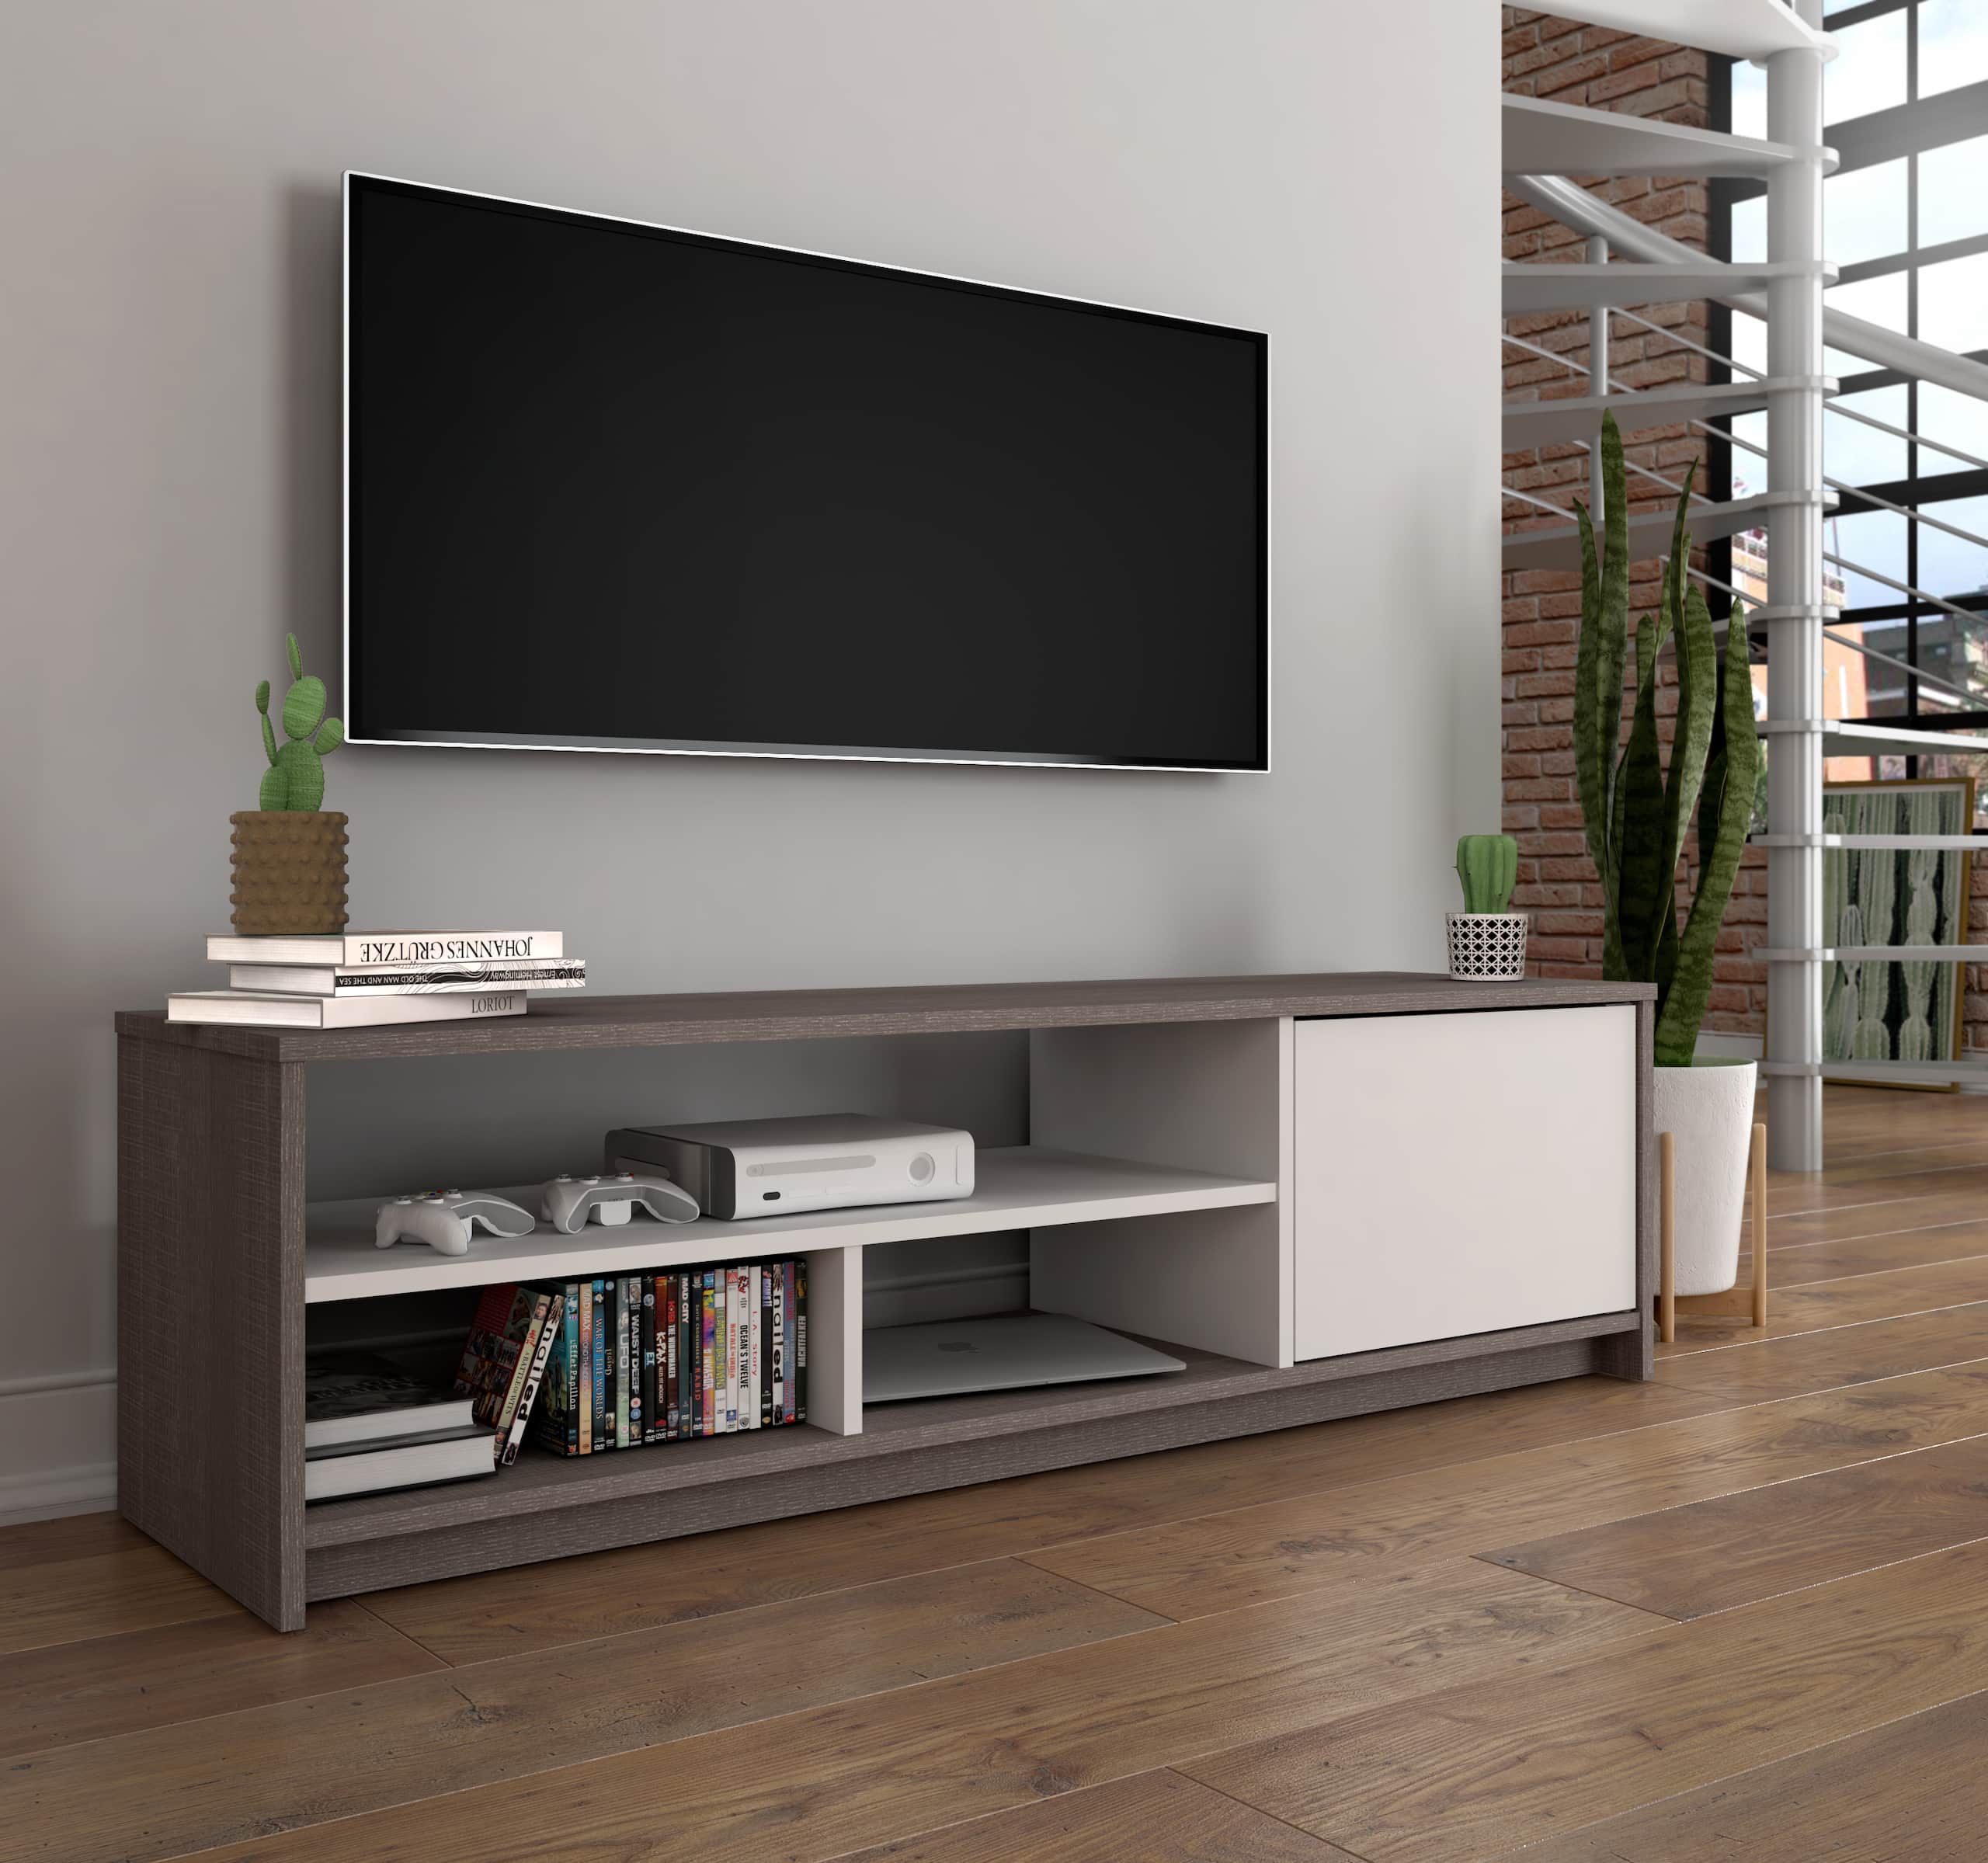 The perfect contemporary living room TV stand